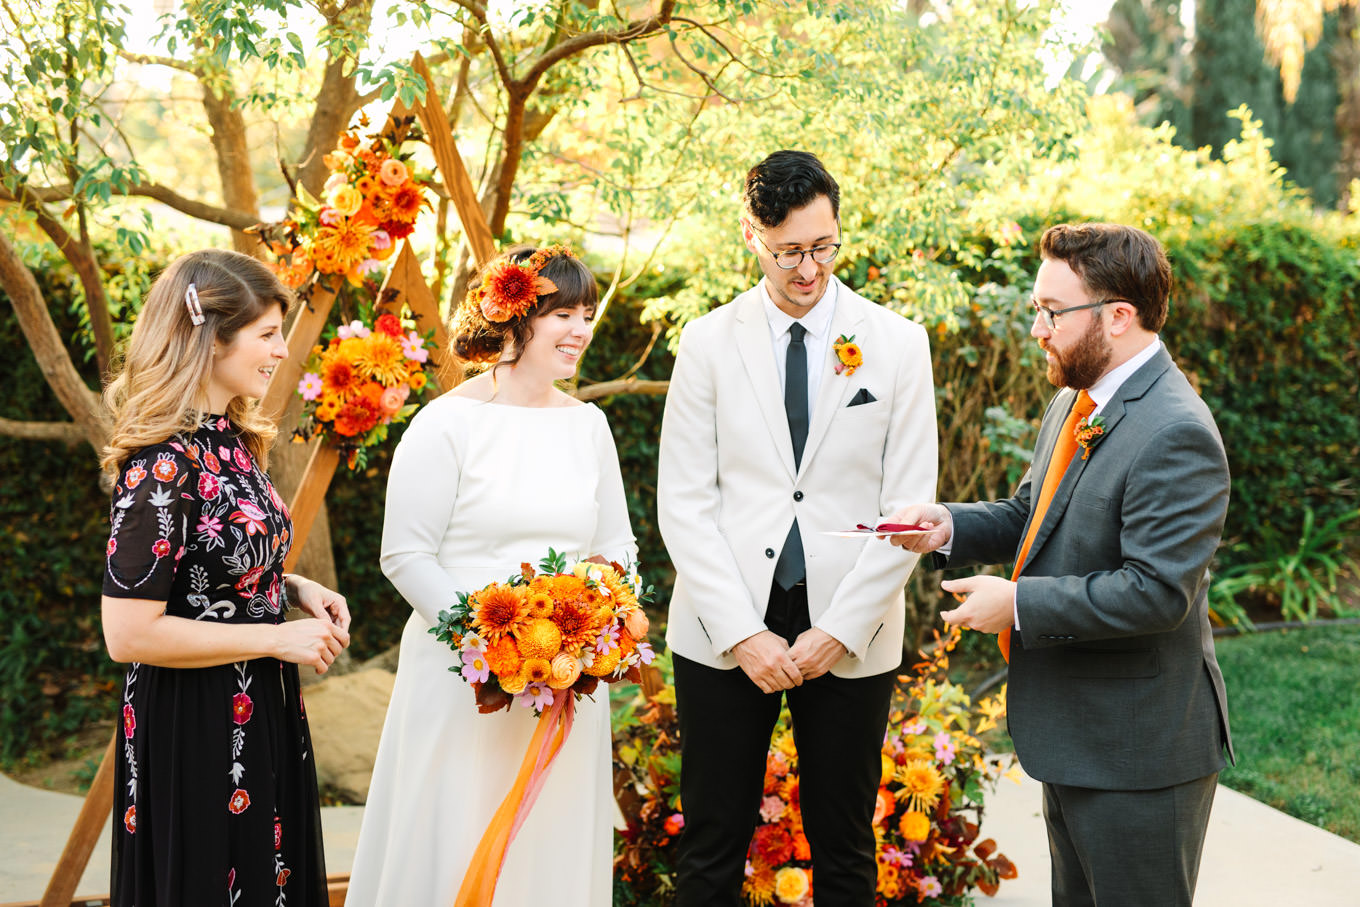 Bride and groom with unique part of ceremony | Vibrant backyard micro wedding featured on Green Wedding Shoes | Colorful LA wedding photography | #losangeleswedding #backyardwedding #microwedding #laweddingphotographer Source: Mary Costa Photography | Los Angeles